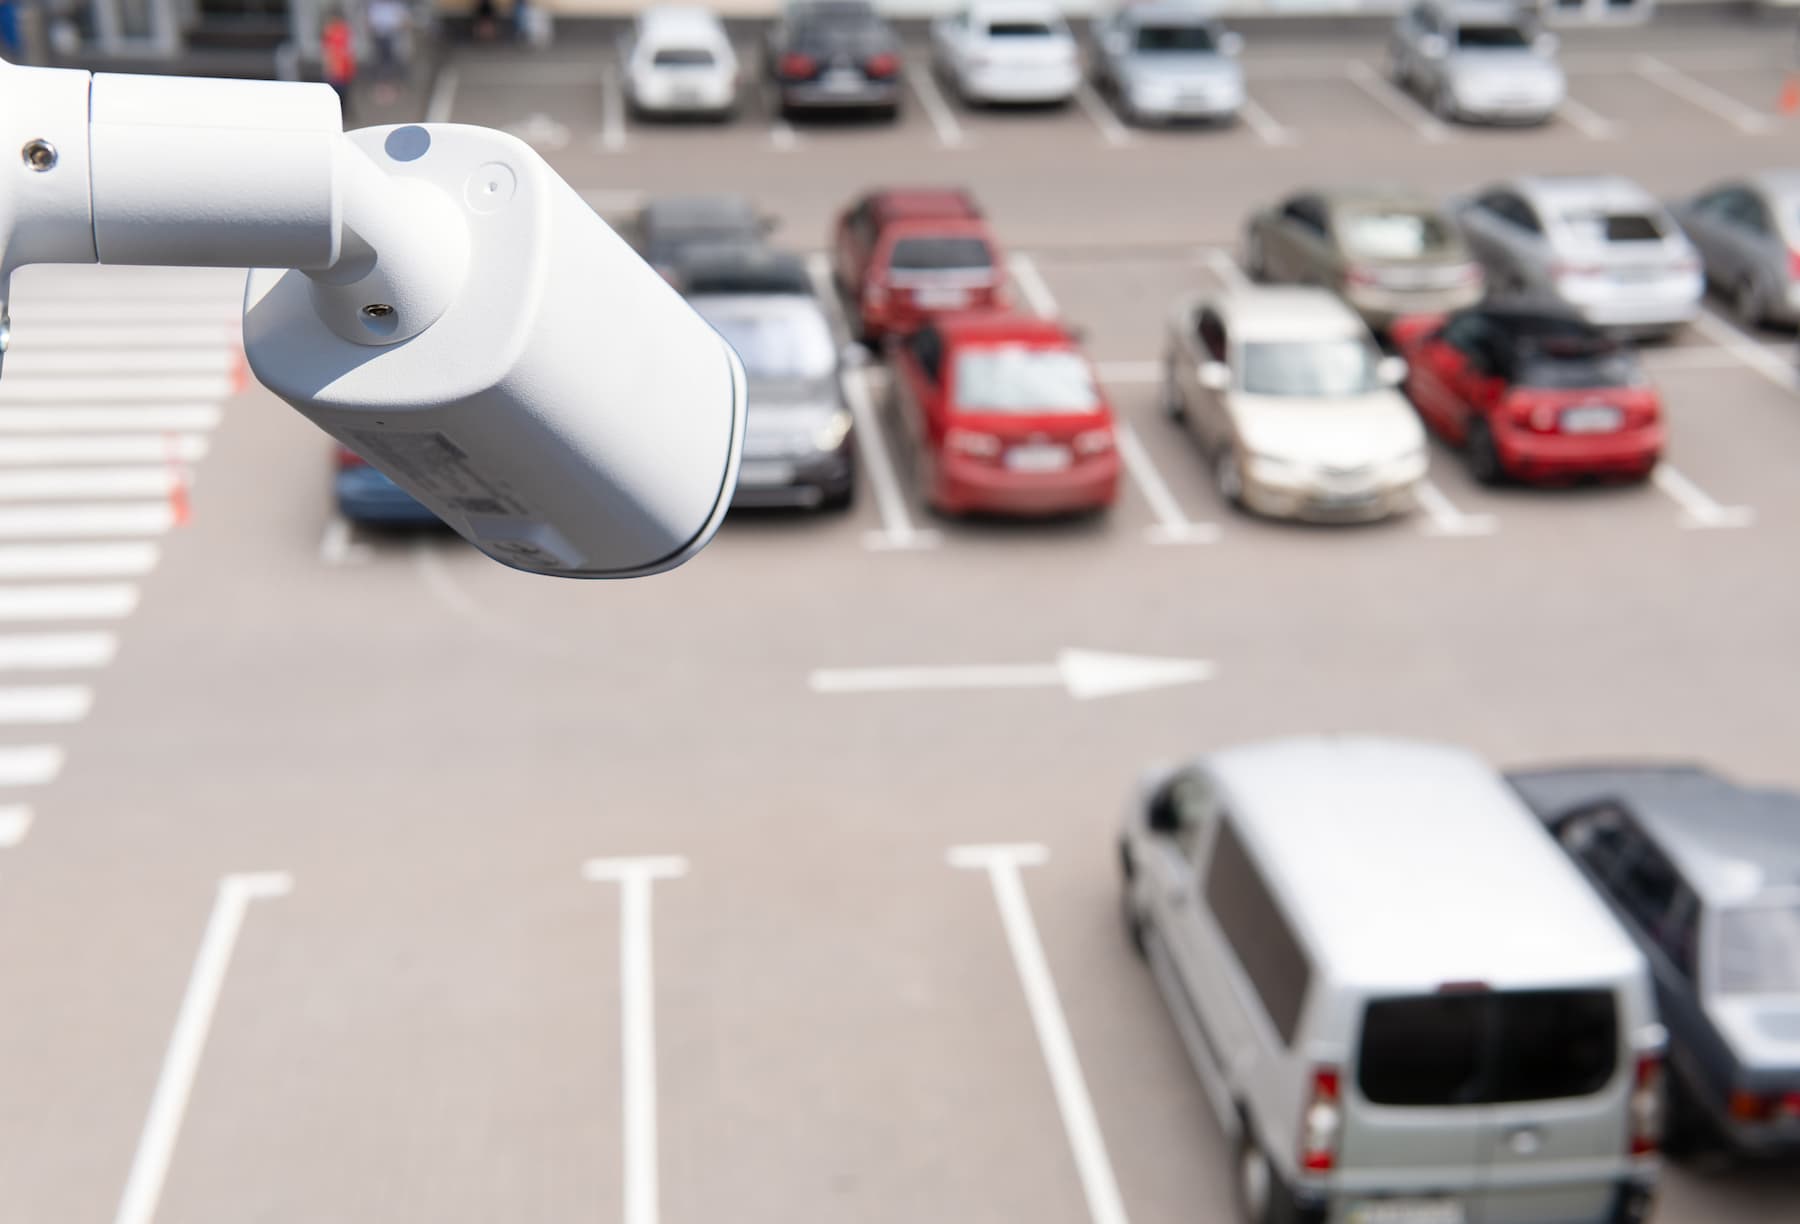 AI applied to occupancy detection in intelligent parking lots